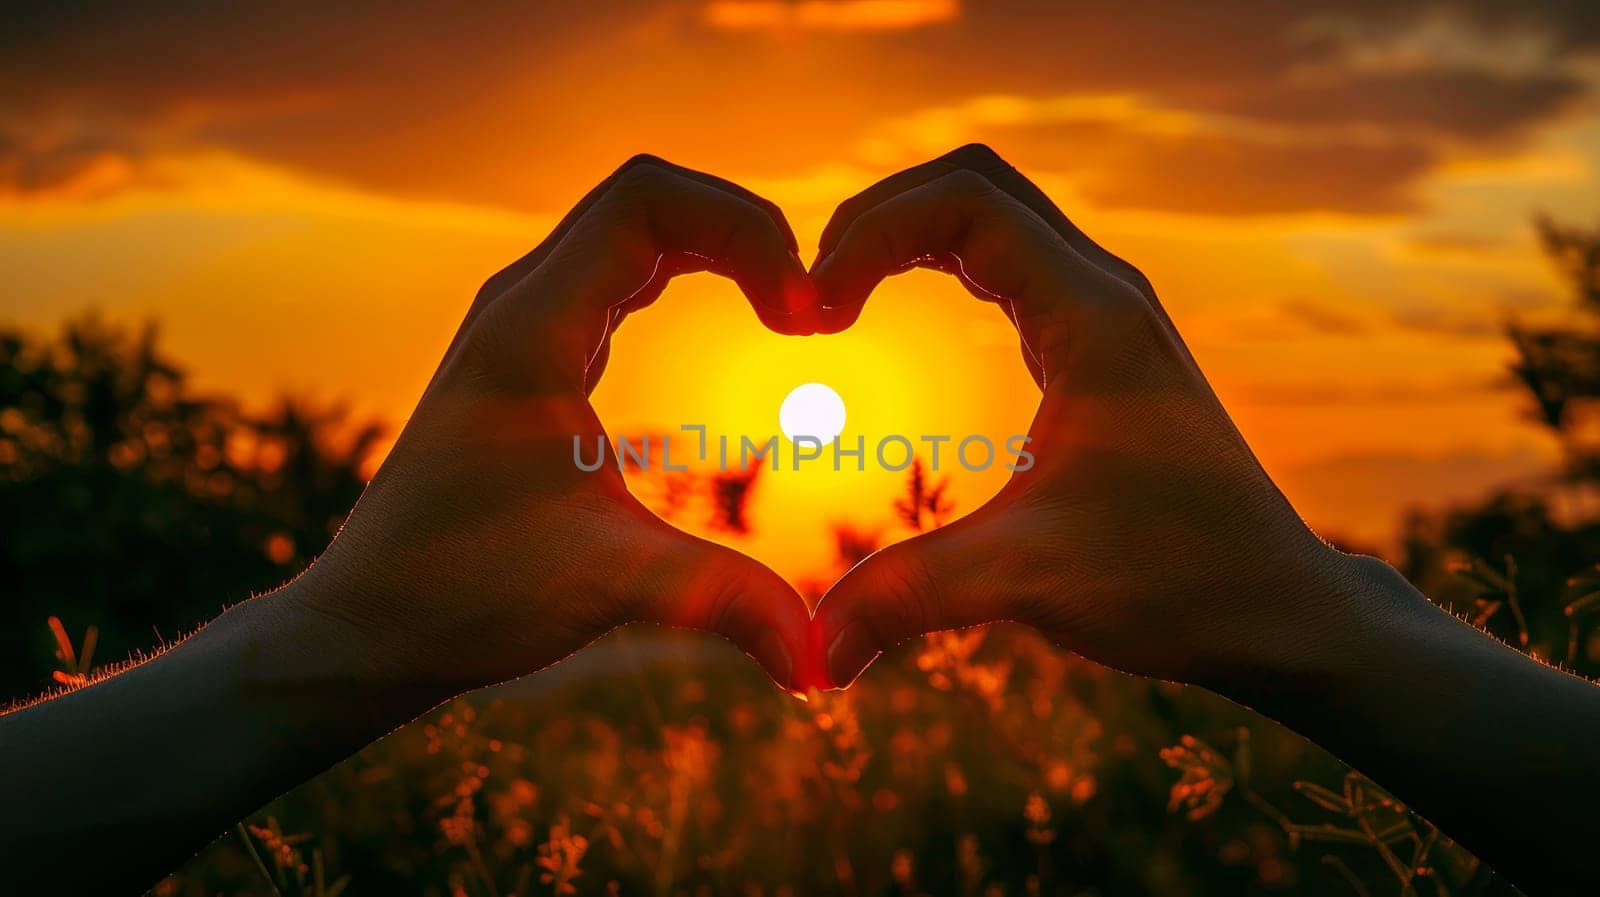 Hands forming heart shape silhouette against vibrant sunset sky, symbolizing love, warmth and connection with nature by ailike